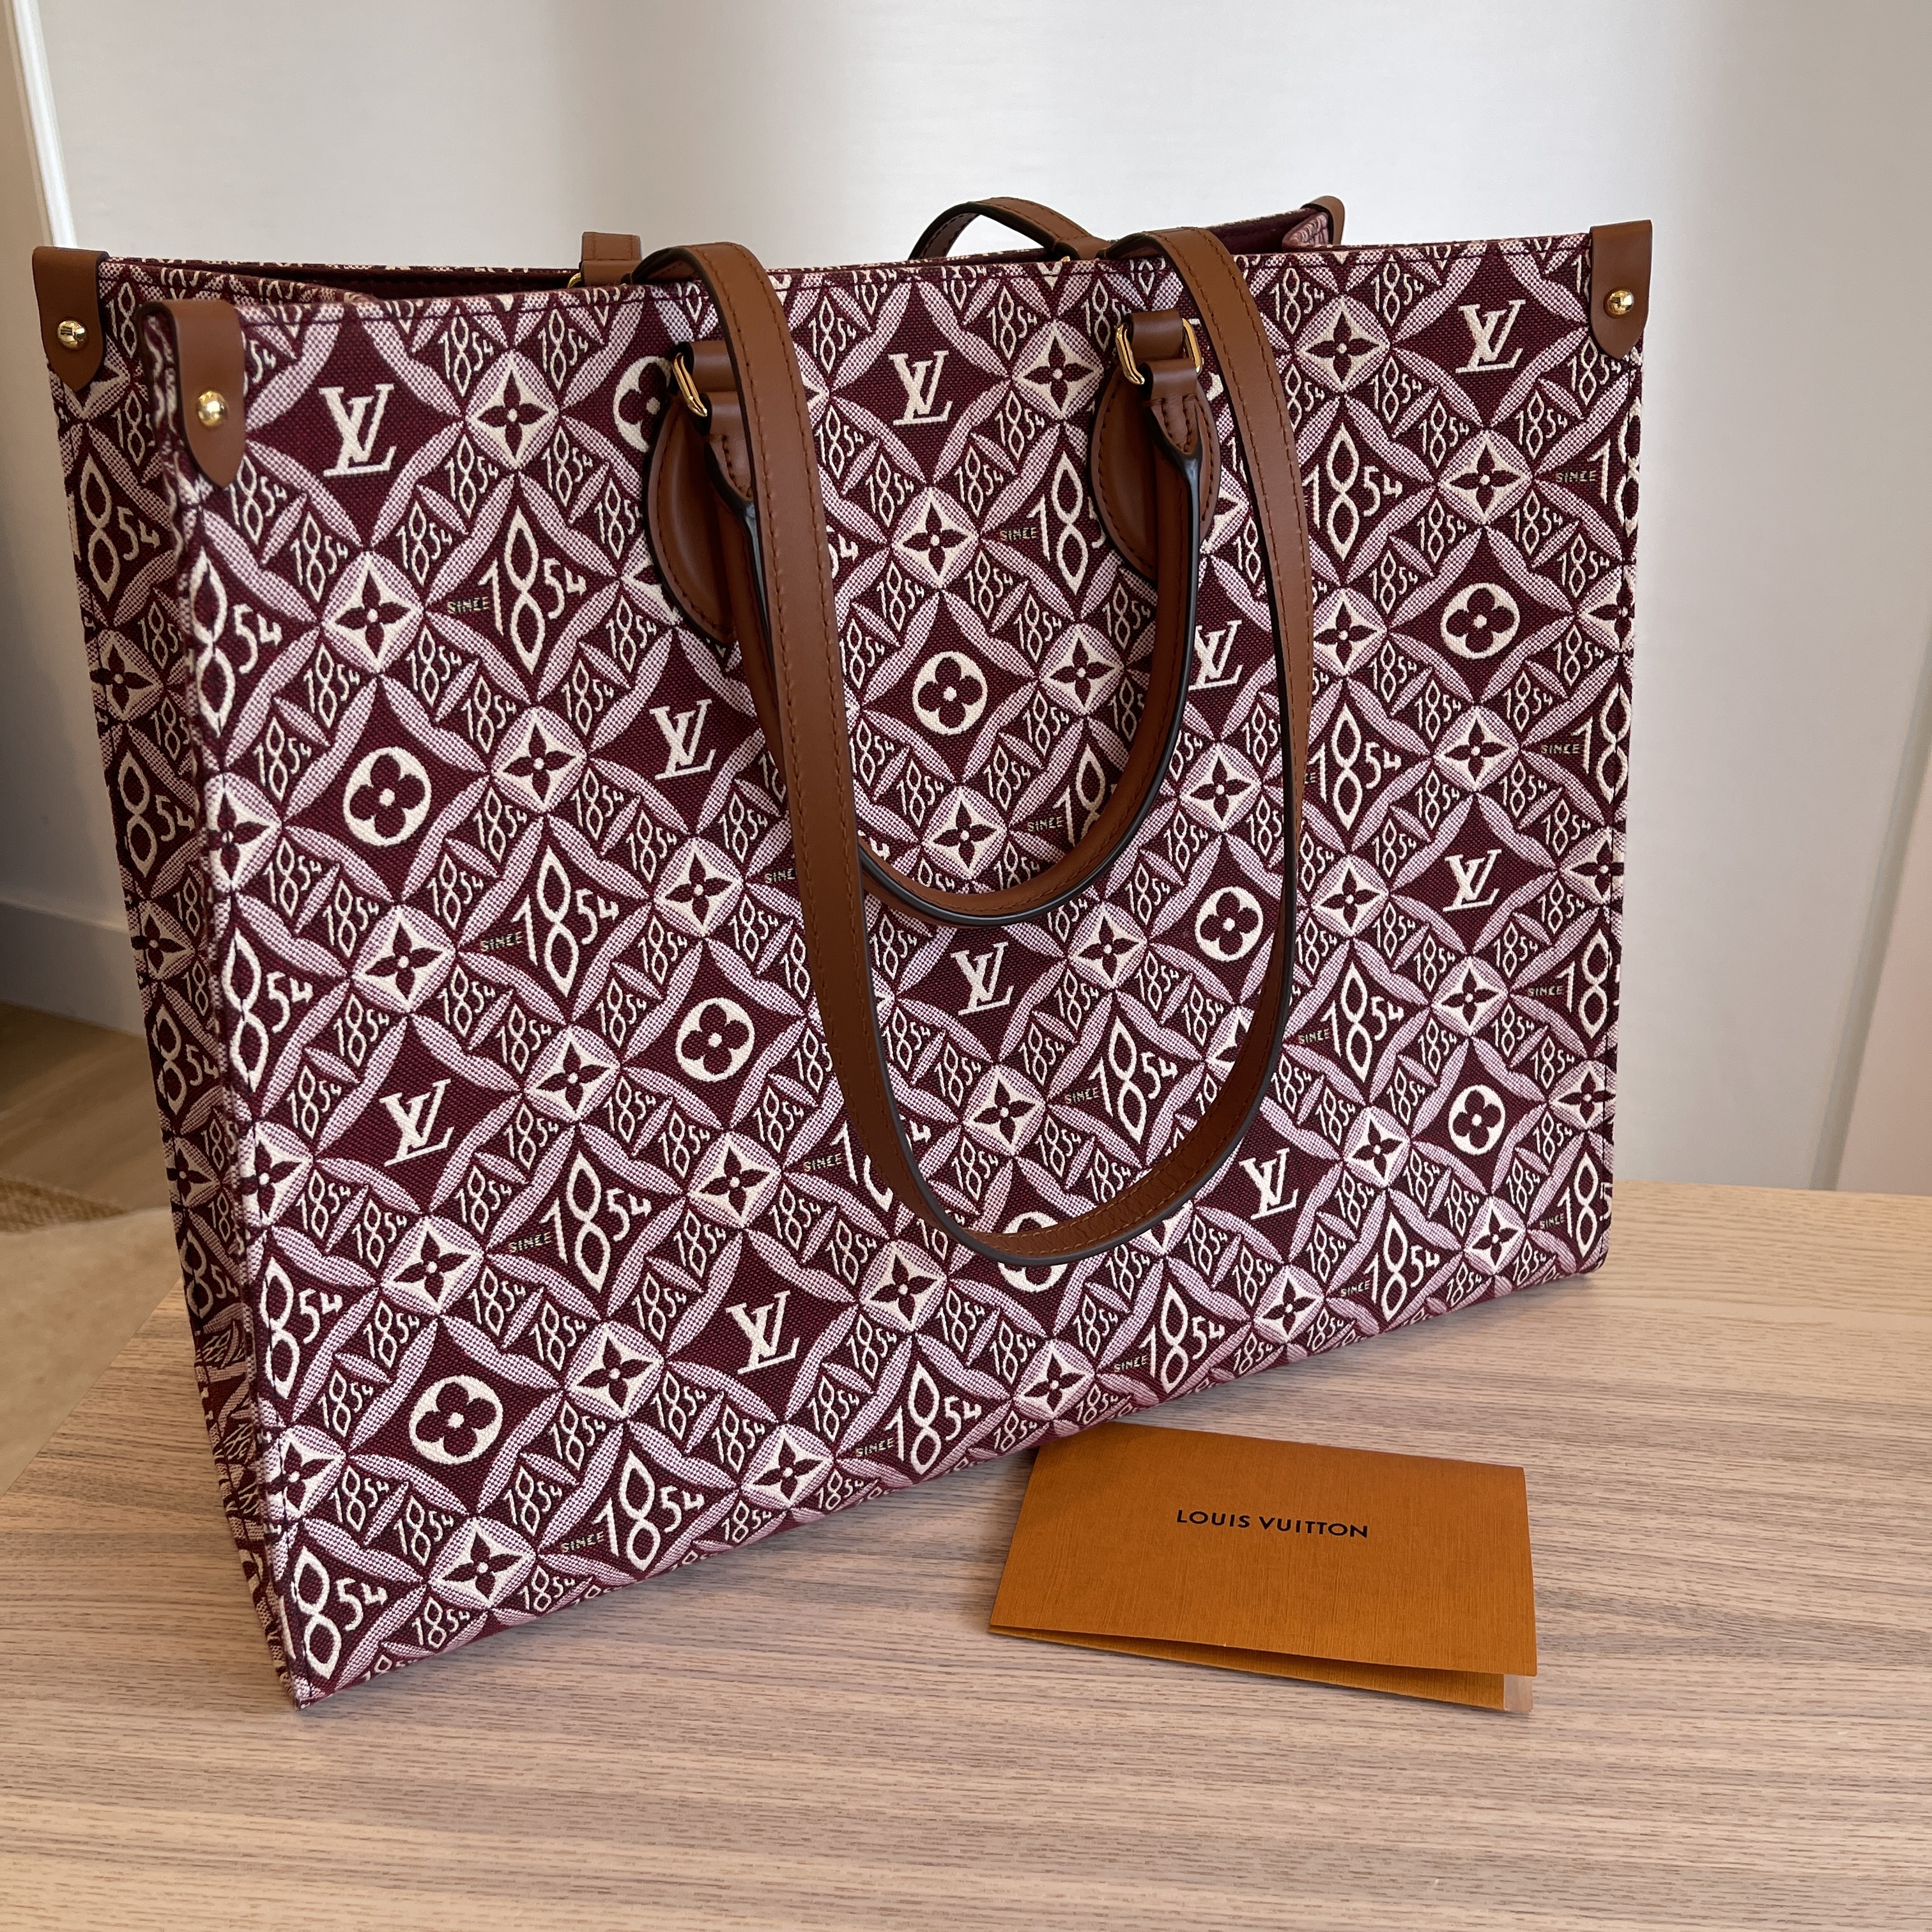 Louis Vuitton OnTheGo Tote Limited Edition Since 1854 Monogram Jacquard GM